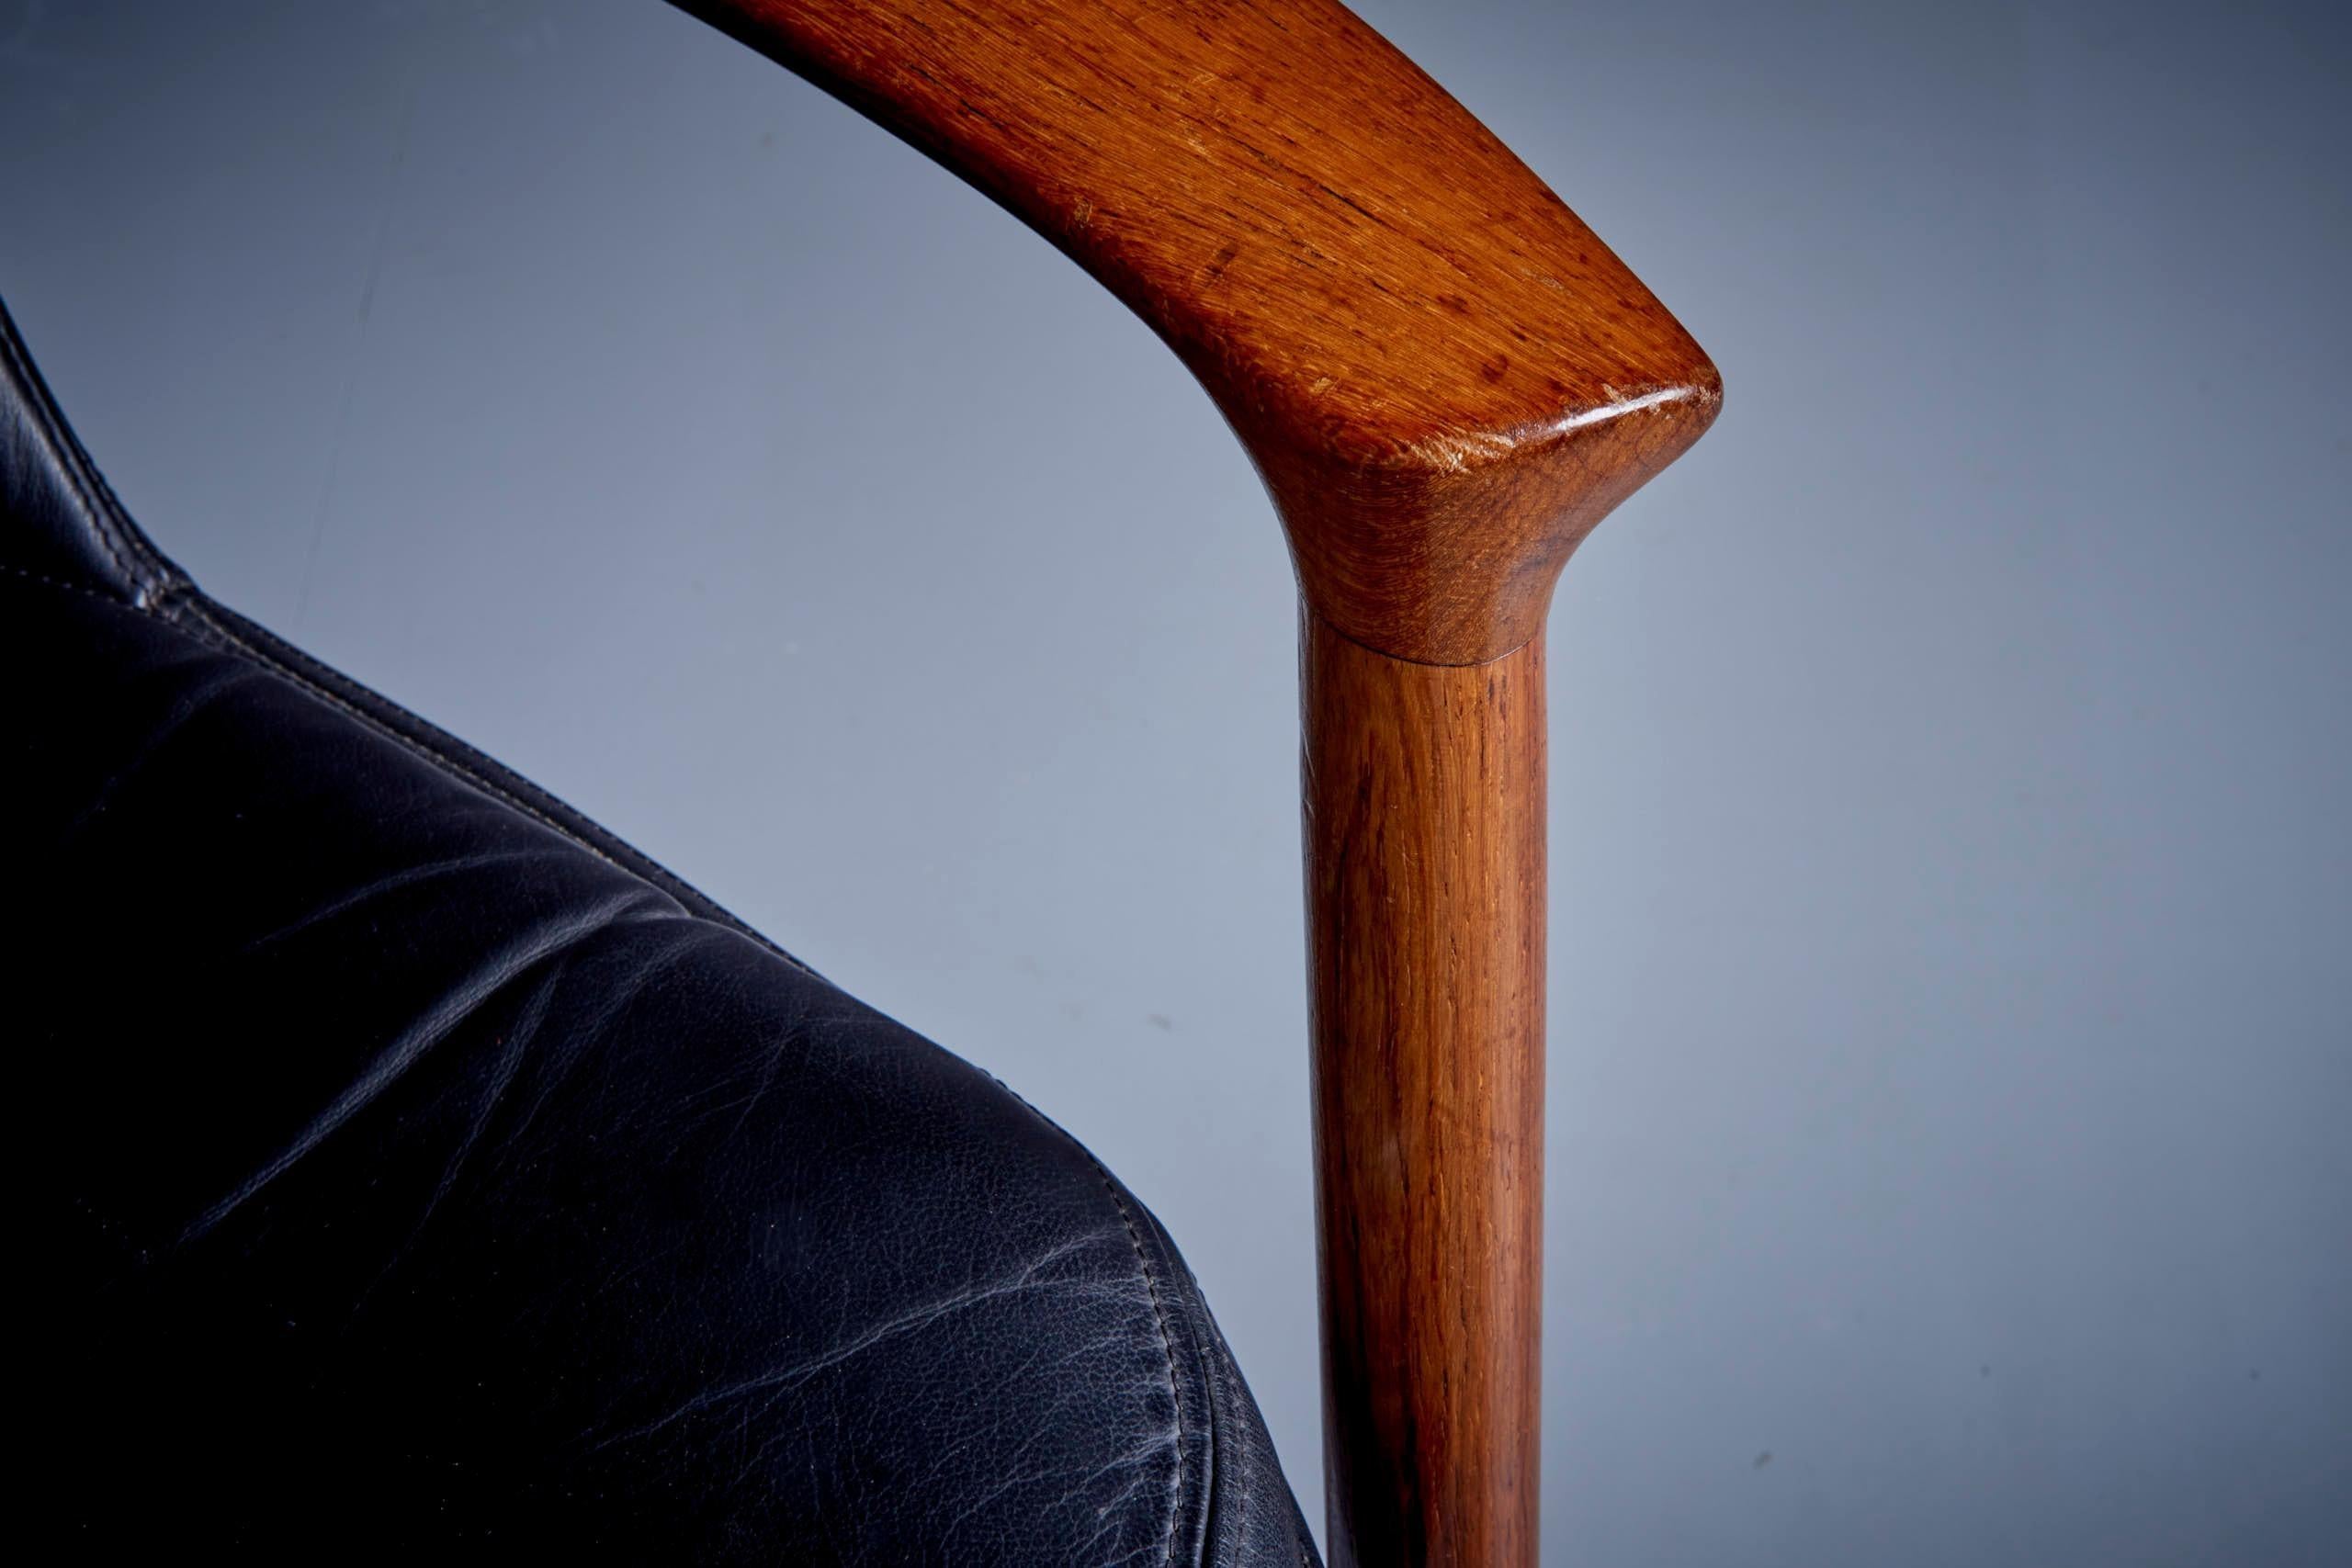 1960s Ib Kofod-Larsen arm or easy chair in Leather for Fröscher Sitform, Germany. The leather has a very nice patina.